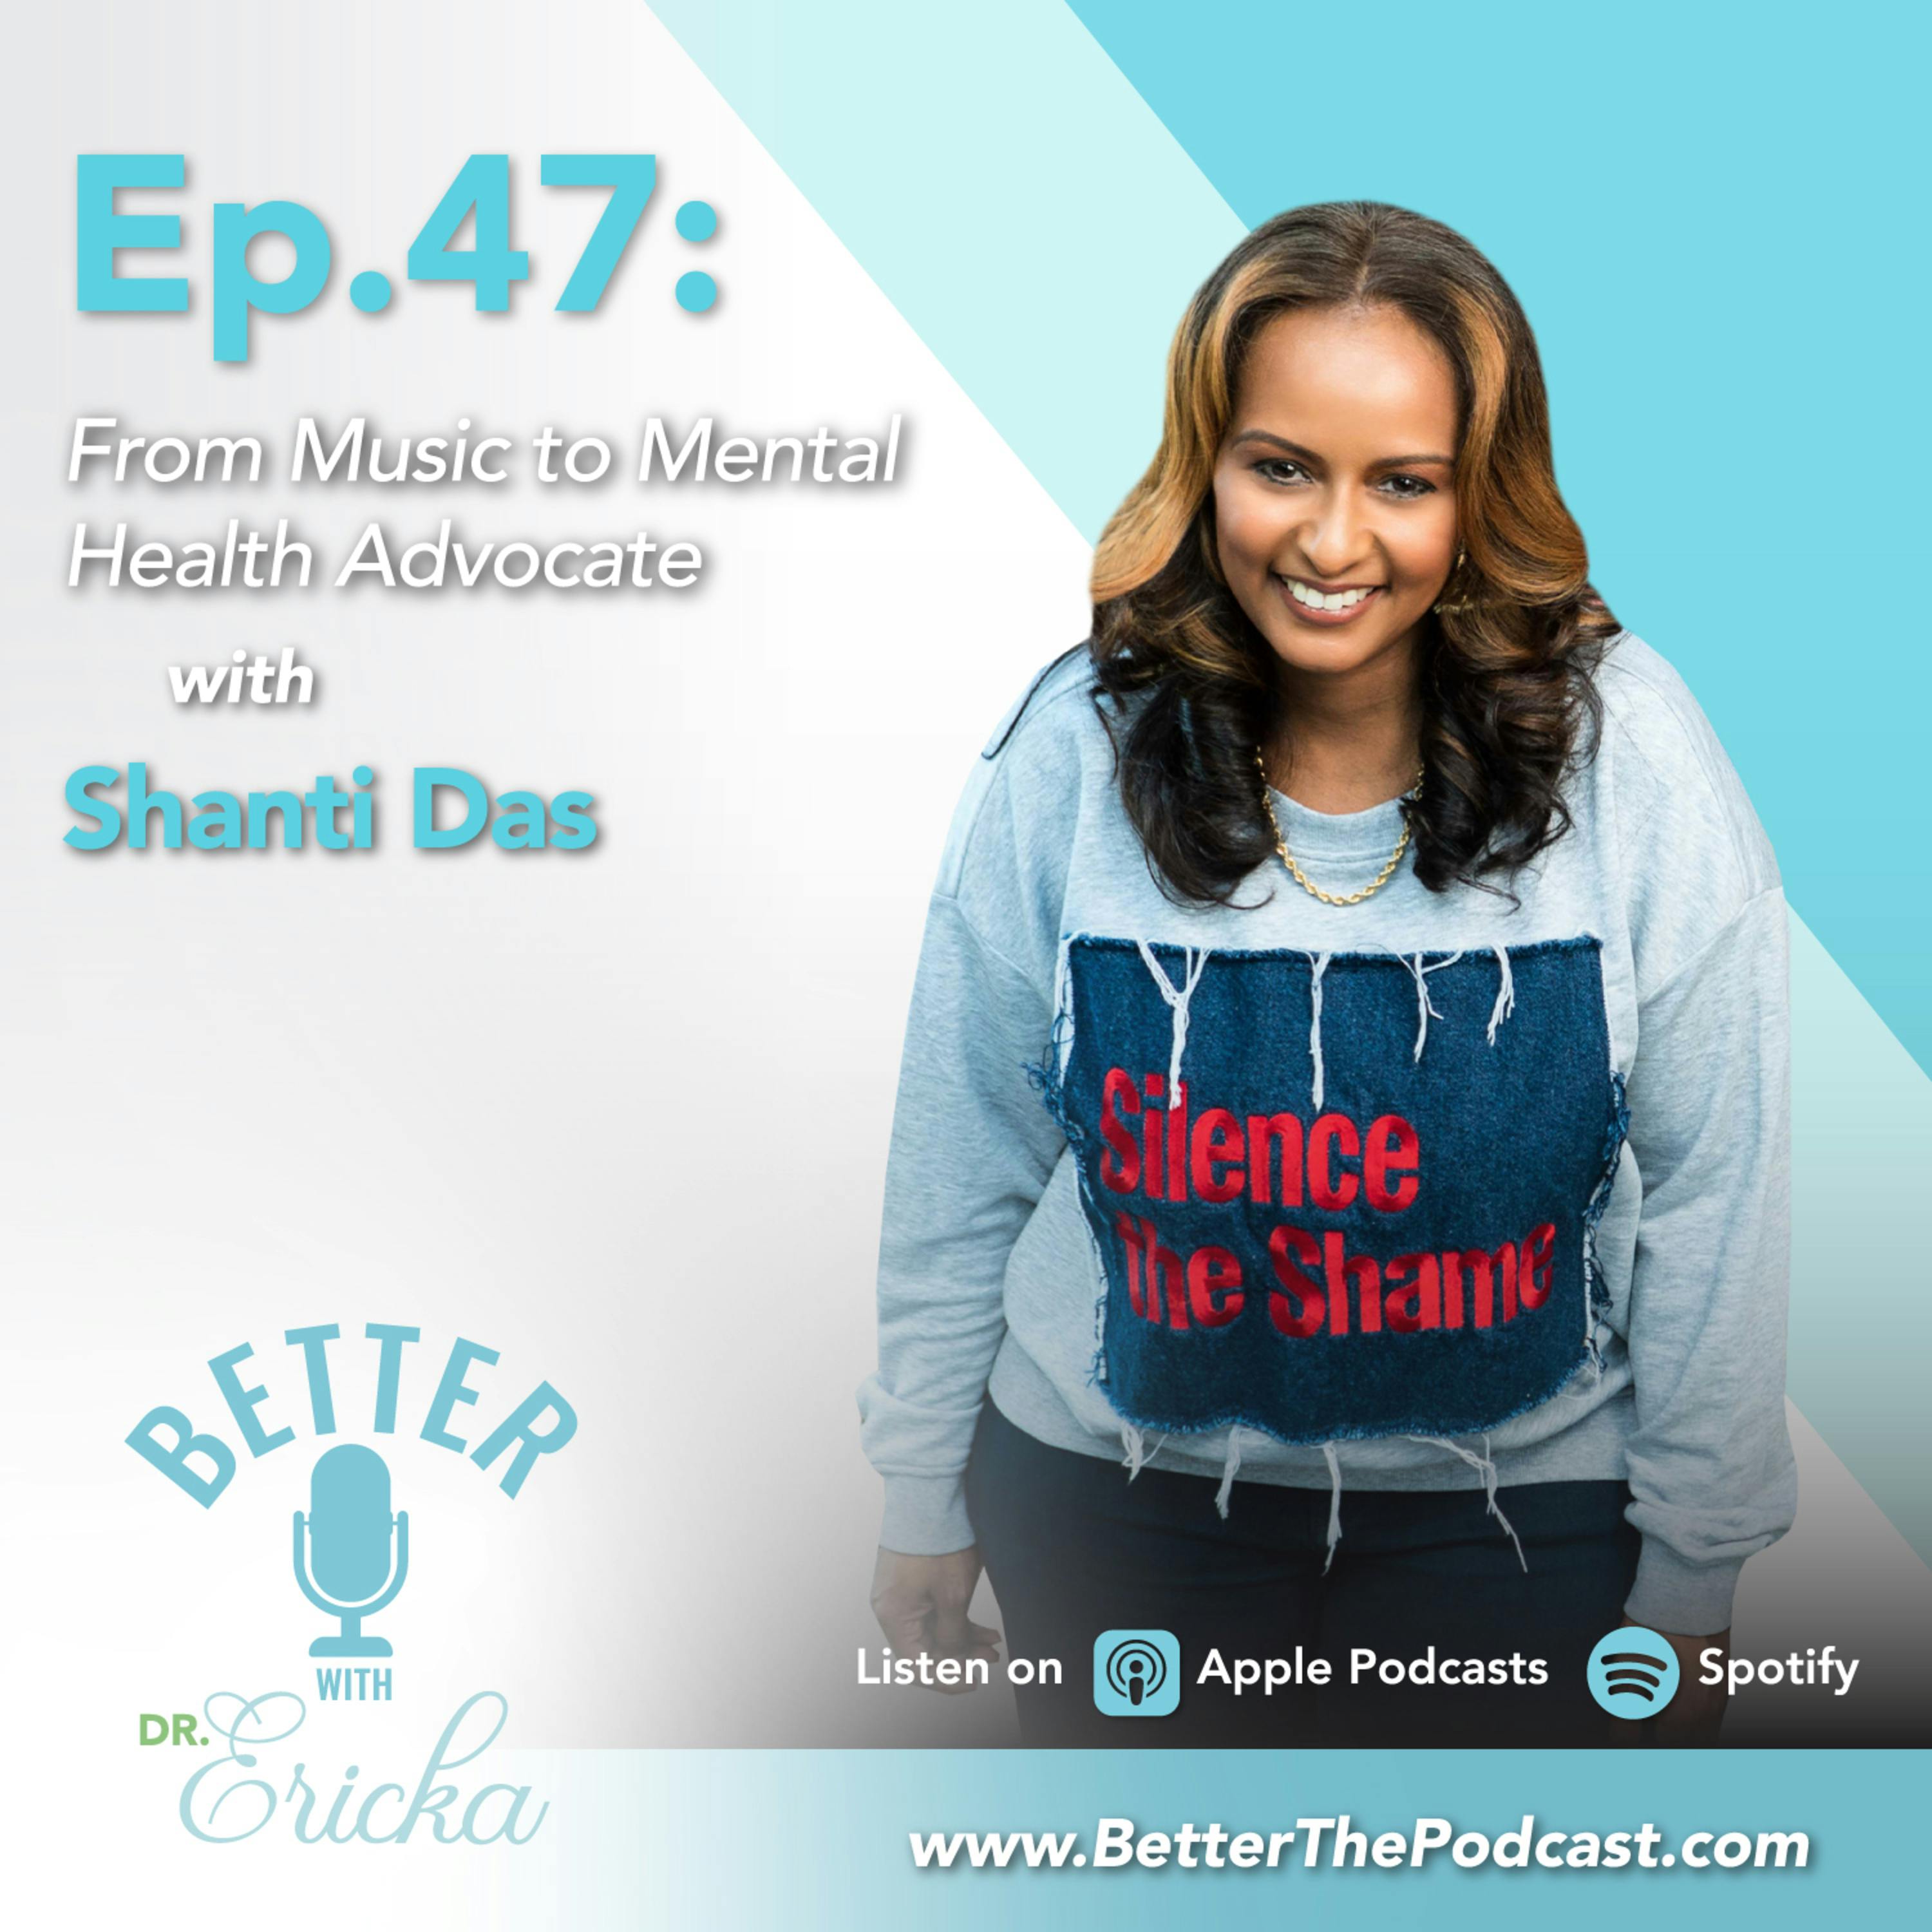 From Music to Mental Health Advocate with Shanti Das